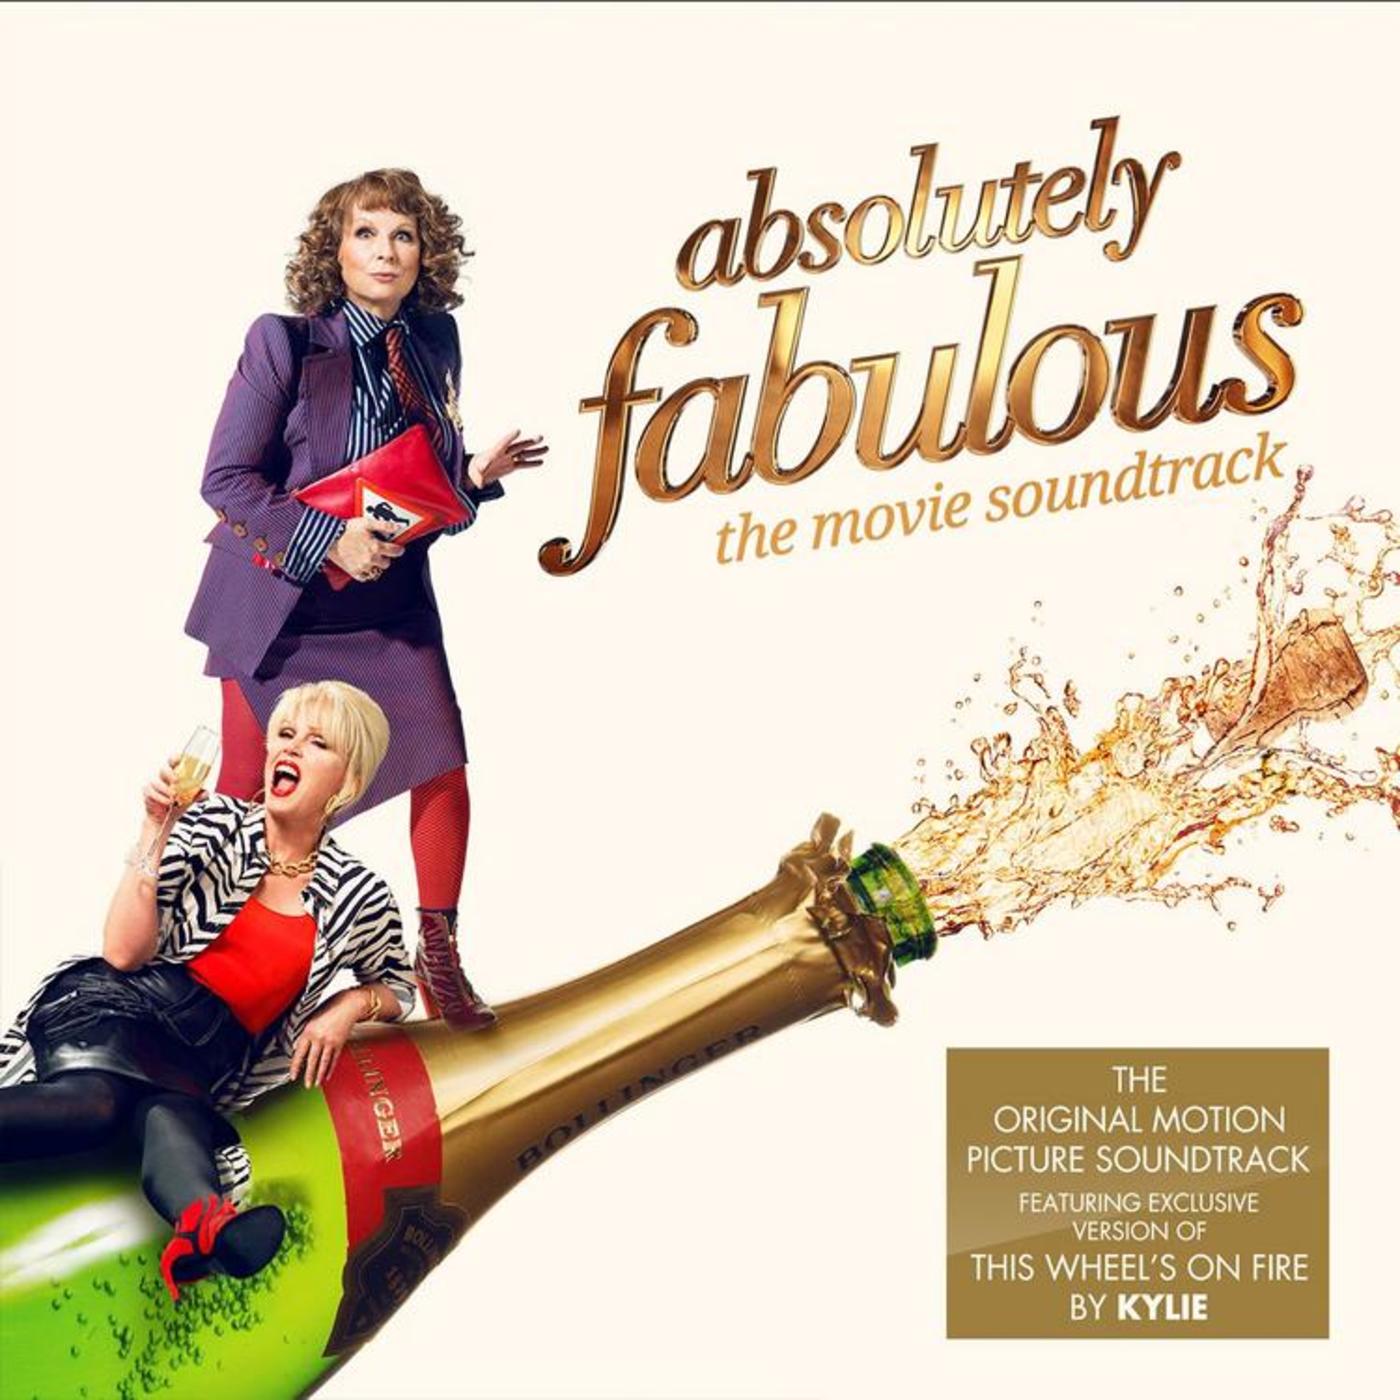 Absolutely Fabulous